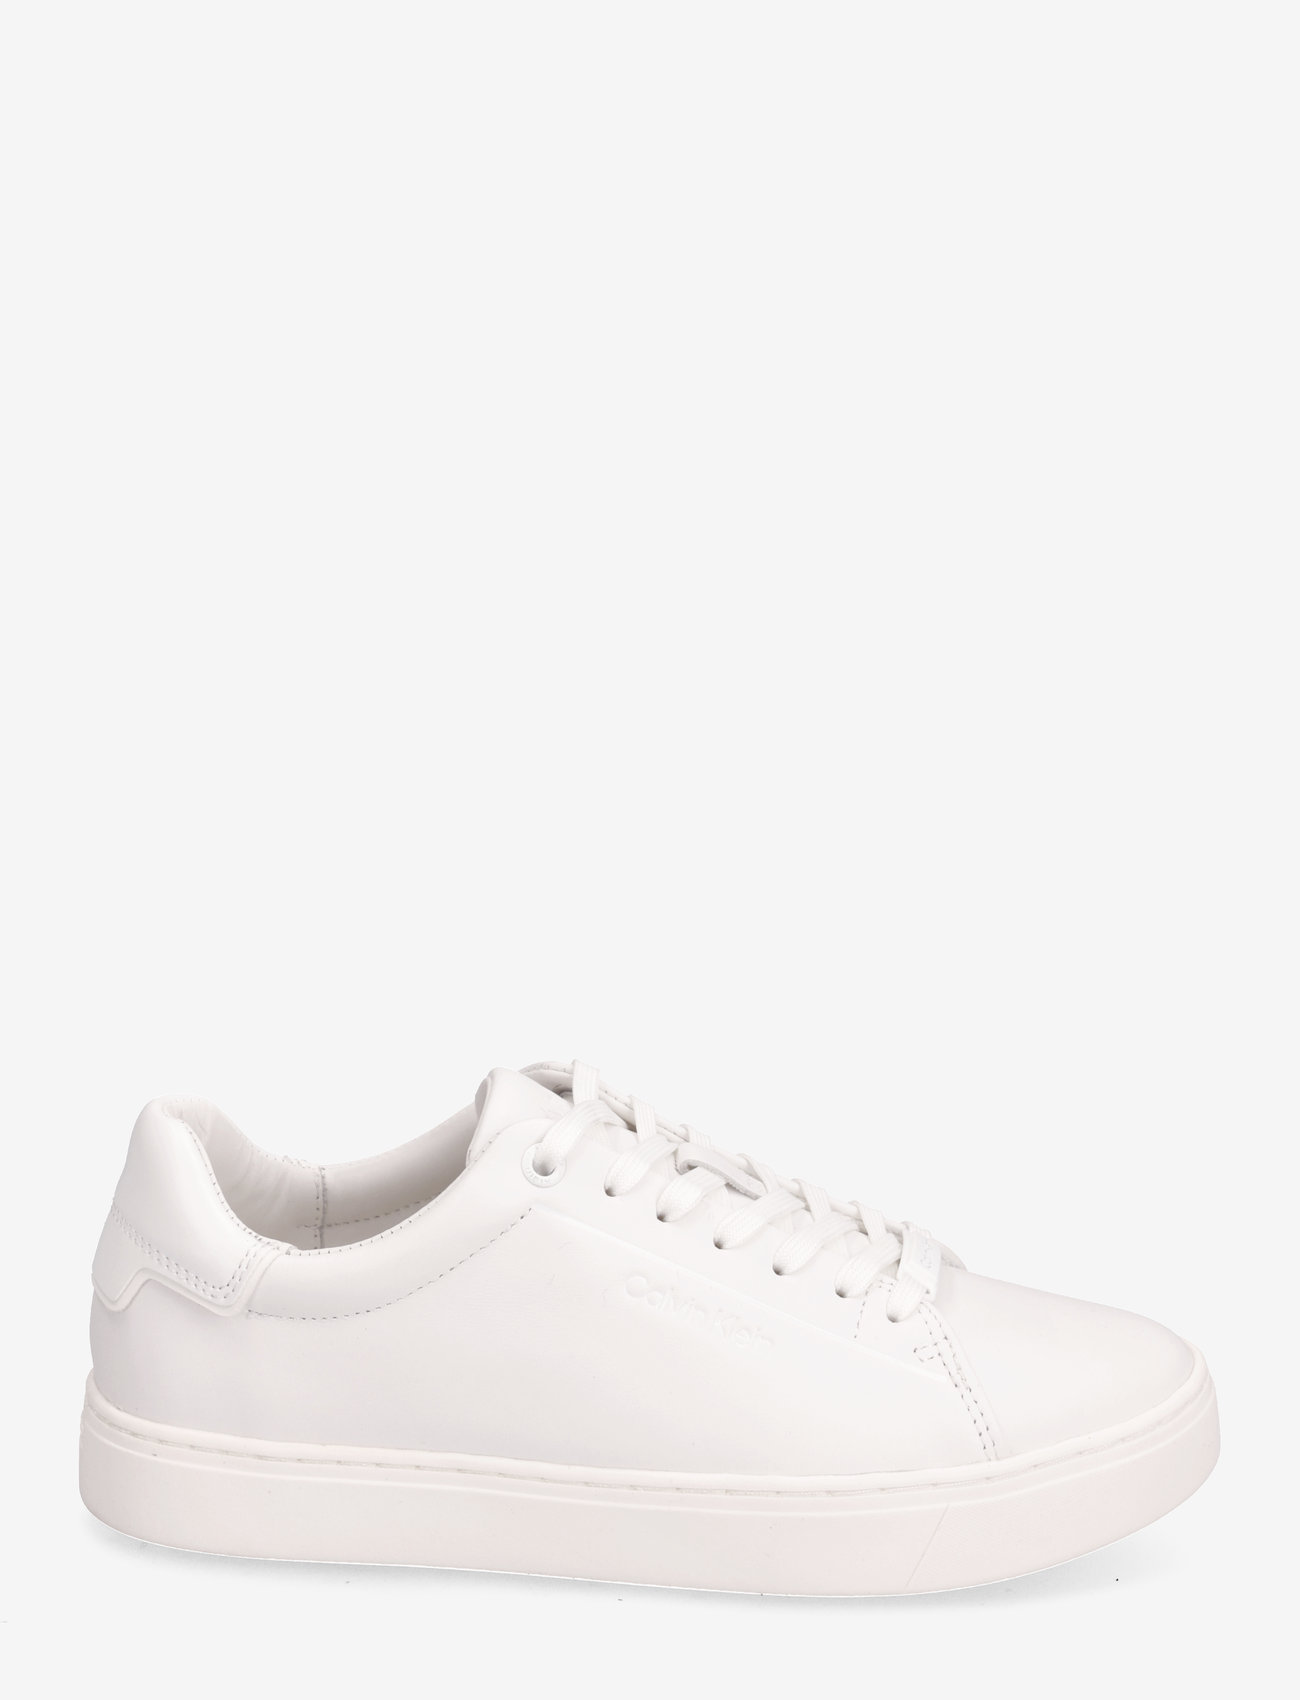 Calvin Klein - CLEAN CUPSOLE LACE UP - sneakers med lavt skaft - triple white - 1